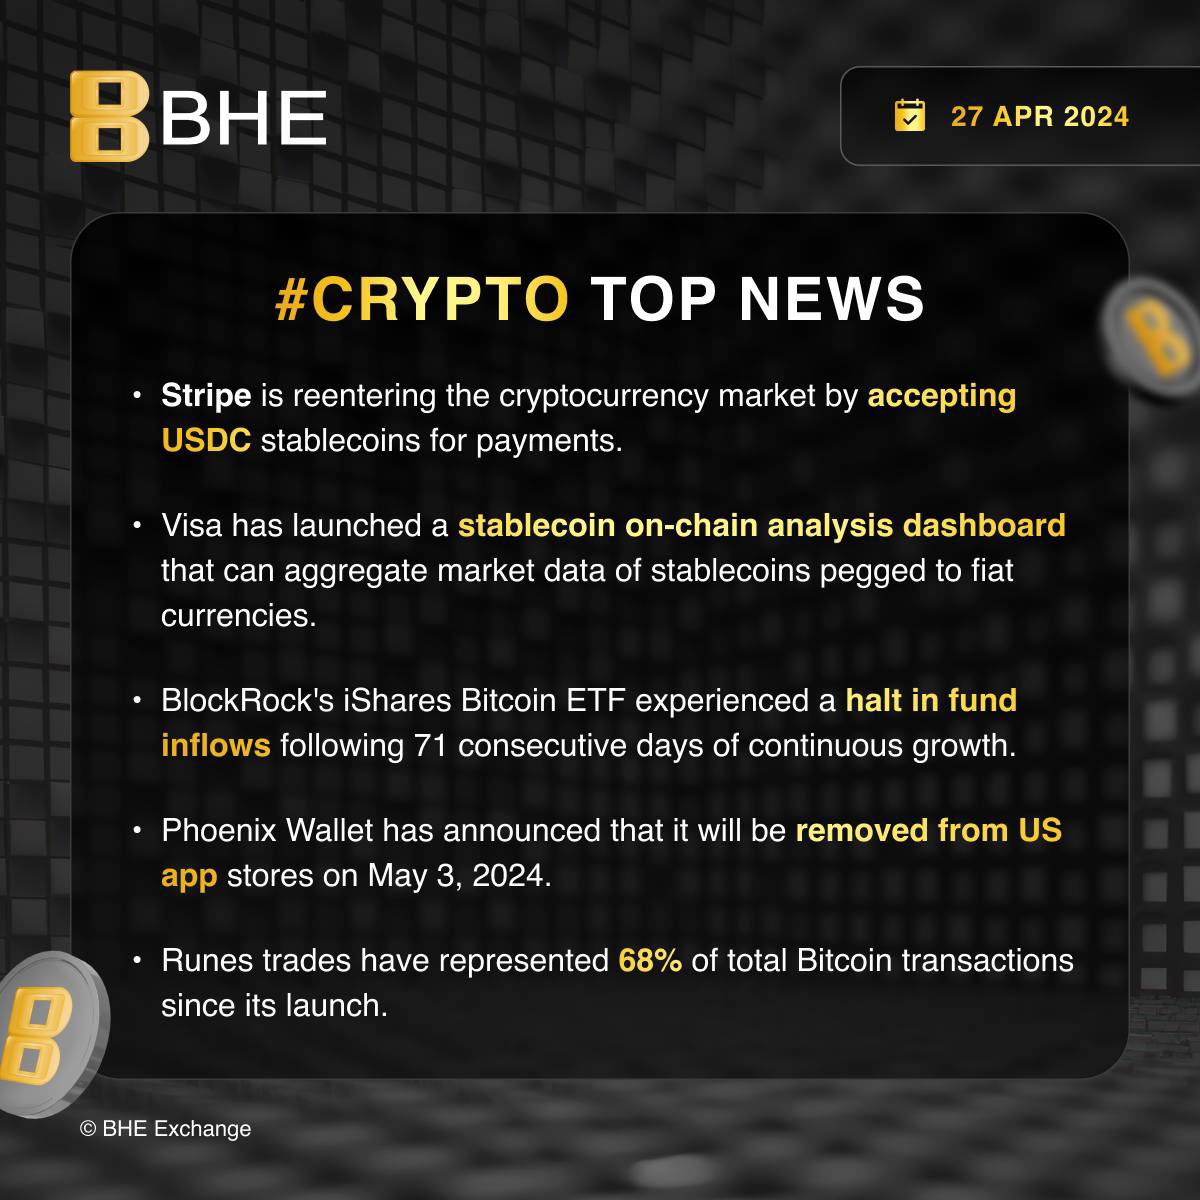 📰BHE #Crypto Update - 27 April 

🔹Stripe is accepting USDC stablecoins for payments, reentering the cryptocurrency market.
🔹Visa has launched a dashboard for on-chain analysis of fiat-pegged stablecoins.
🔹BlockRock's iShares Bitcoin ETF saw a stop in inflows after 71 days of…